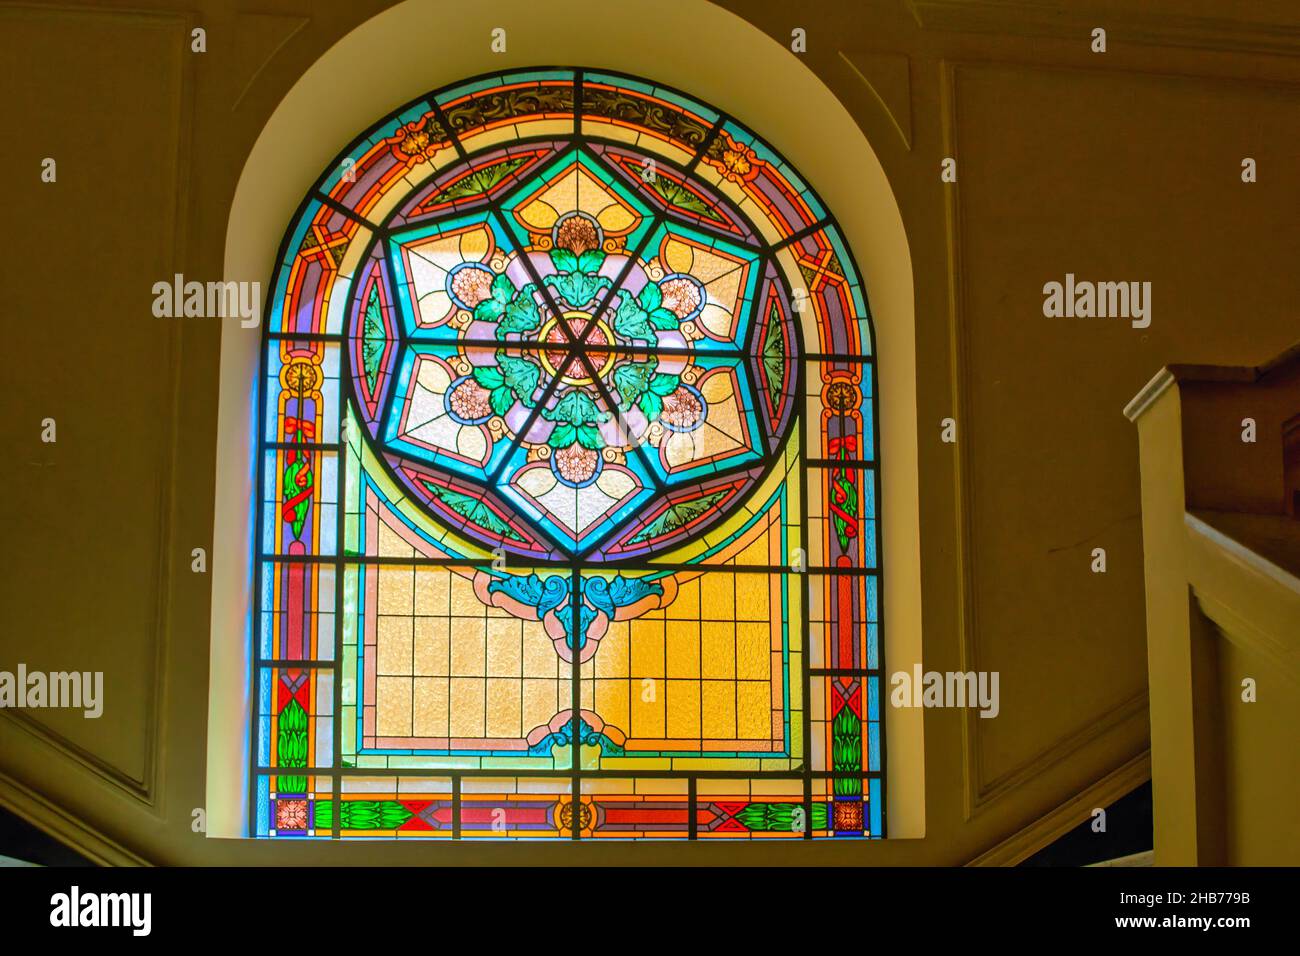 Beautiful stained glass window inside of the Federal Justice Cultural Center. Dec. 17, 2021 Stock Photo